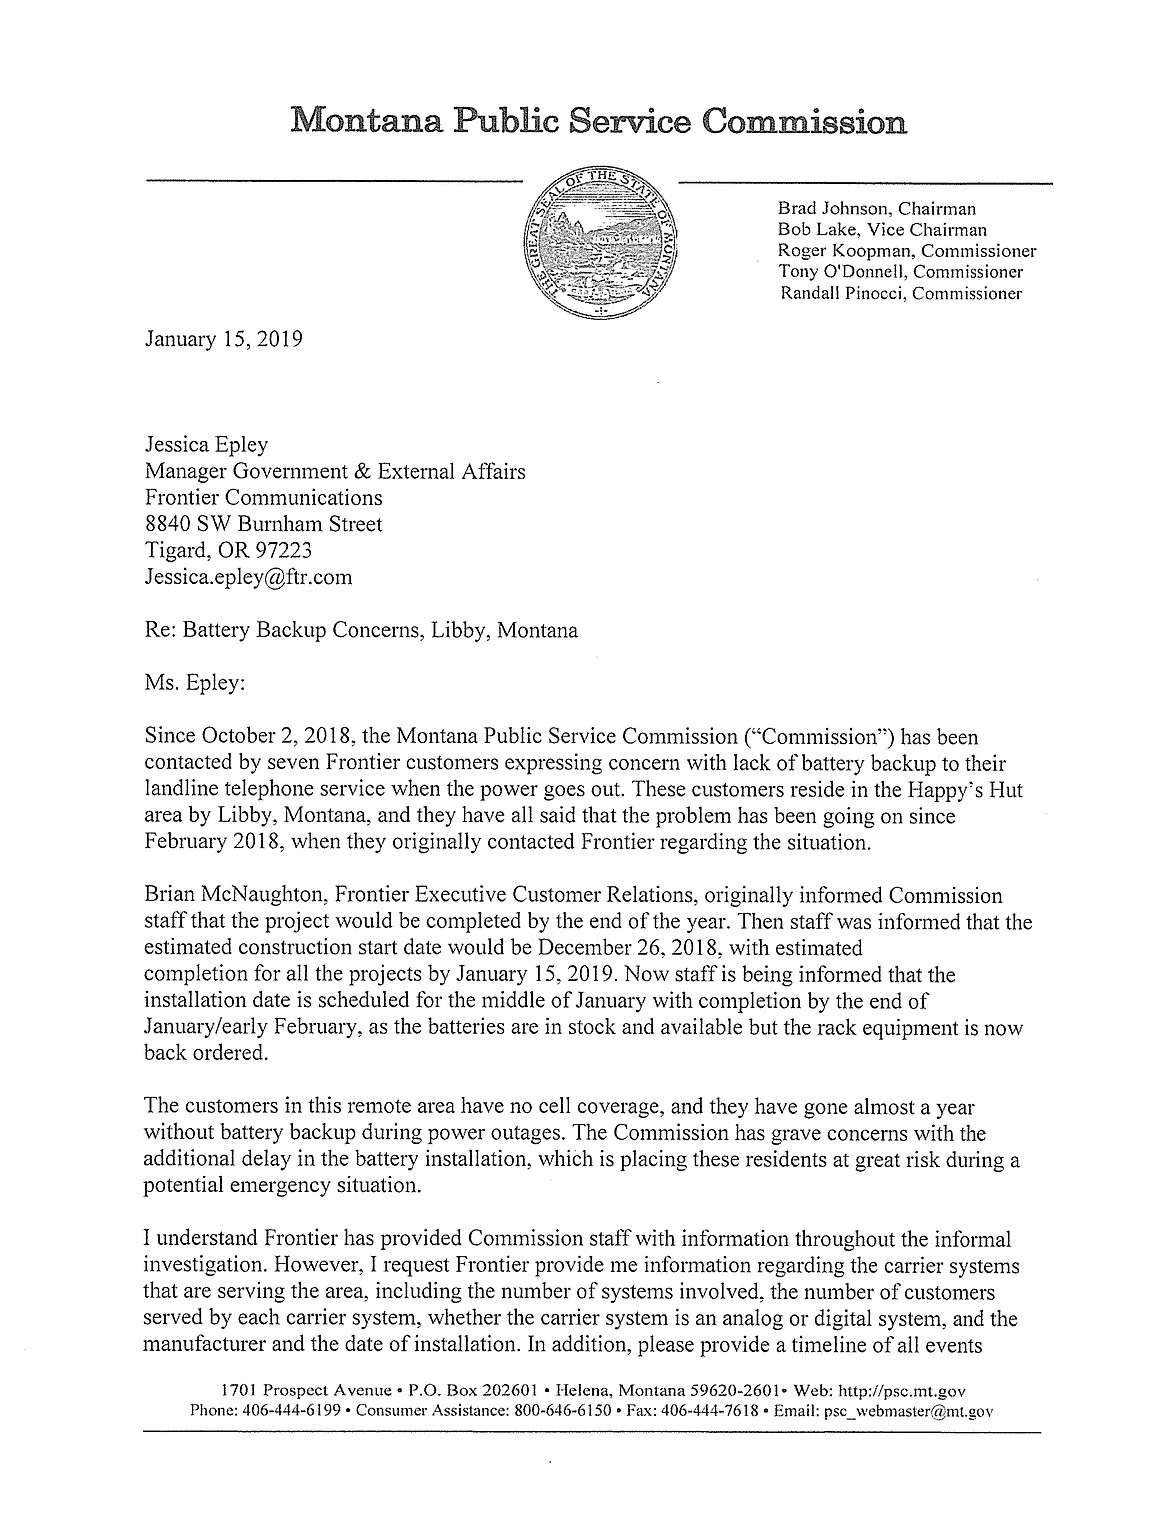 The first  page of the letter the Montana Public Service Comission sent to Frontier Communications on Jan. 15, 2019.